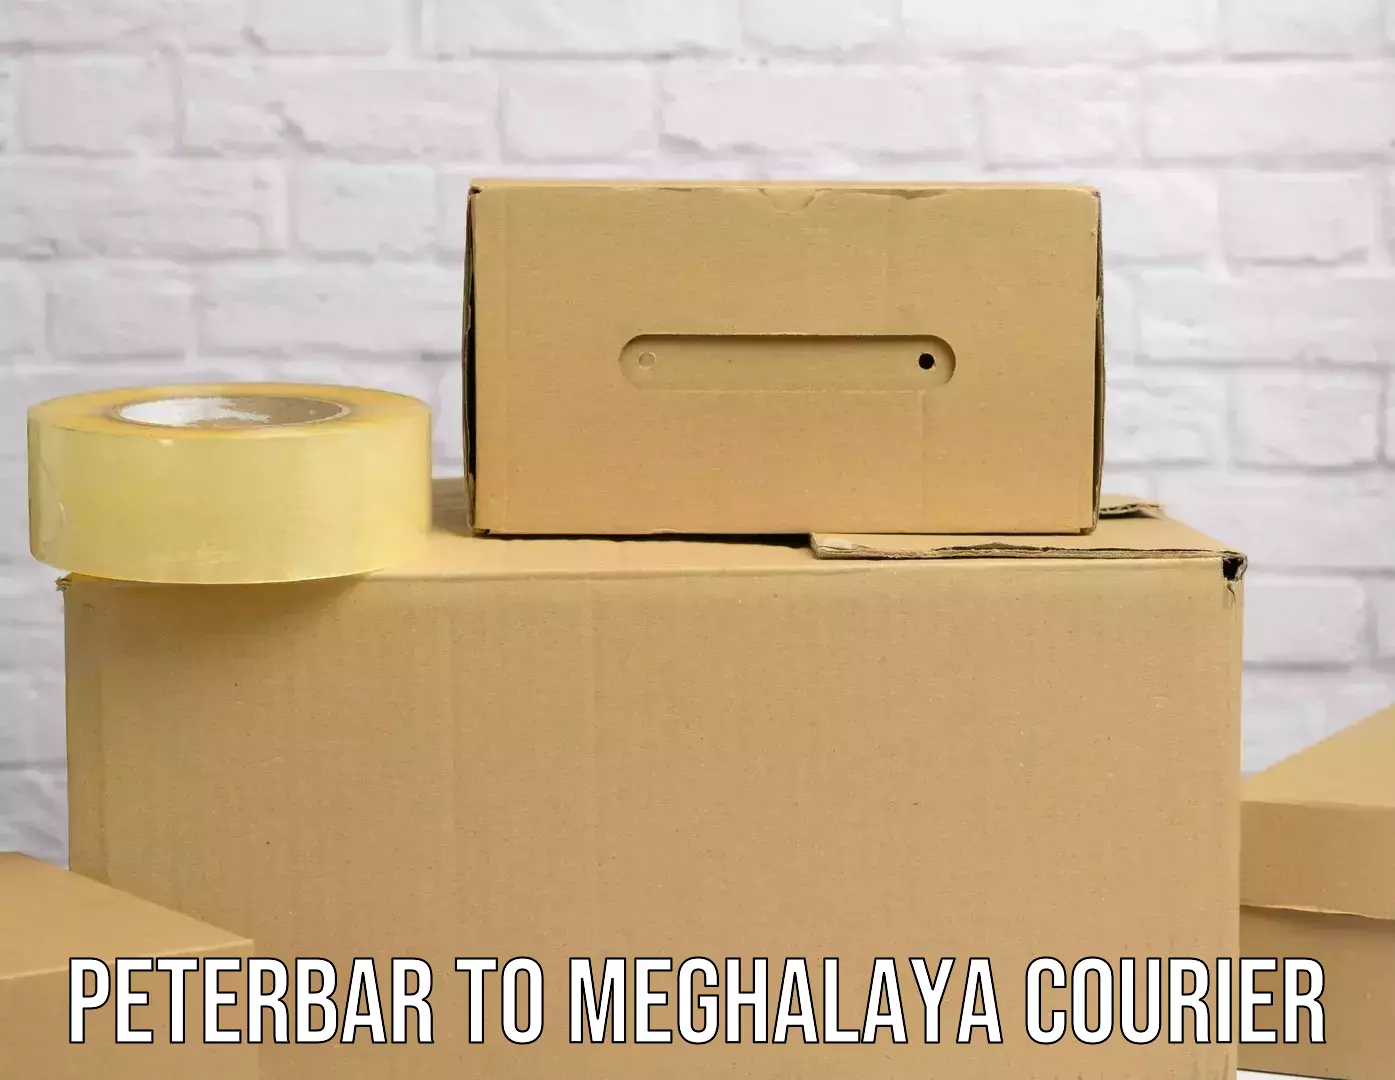 Courier service comparison Peterbar to Meghalaya